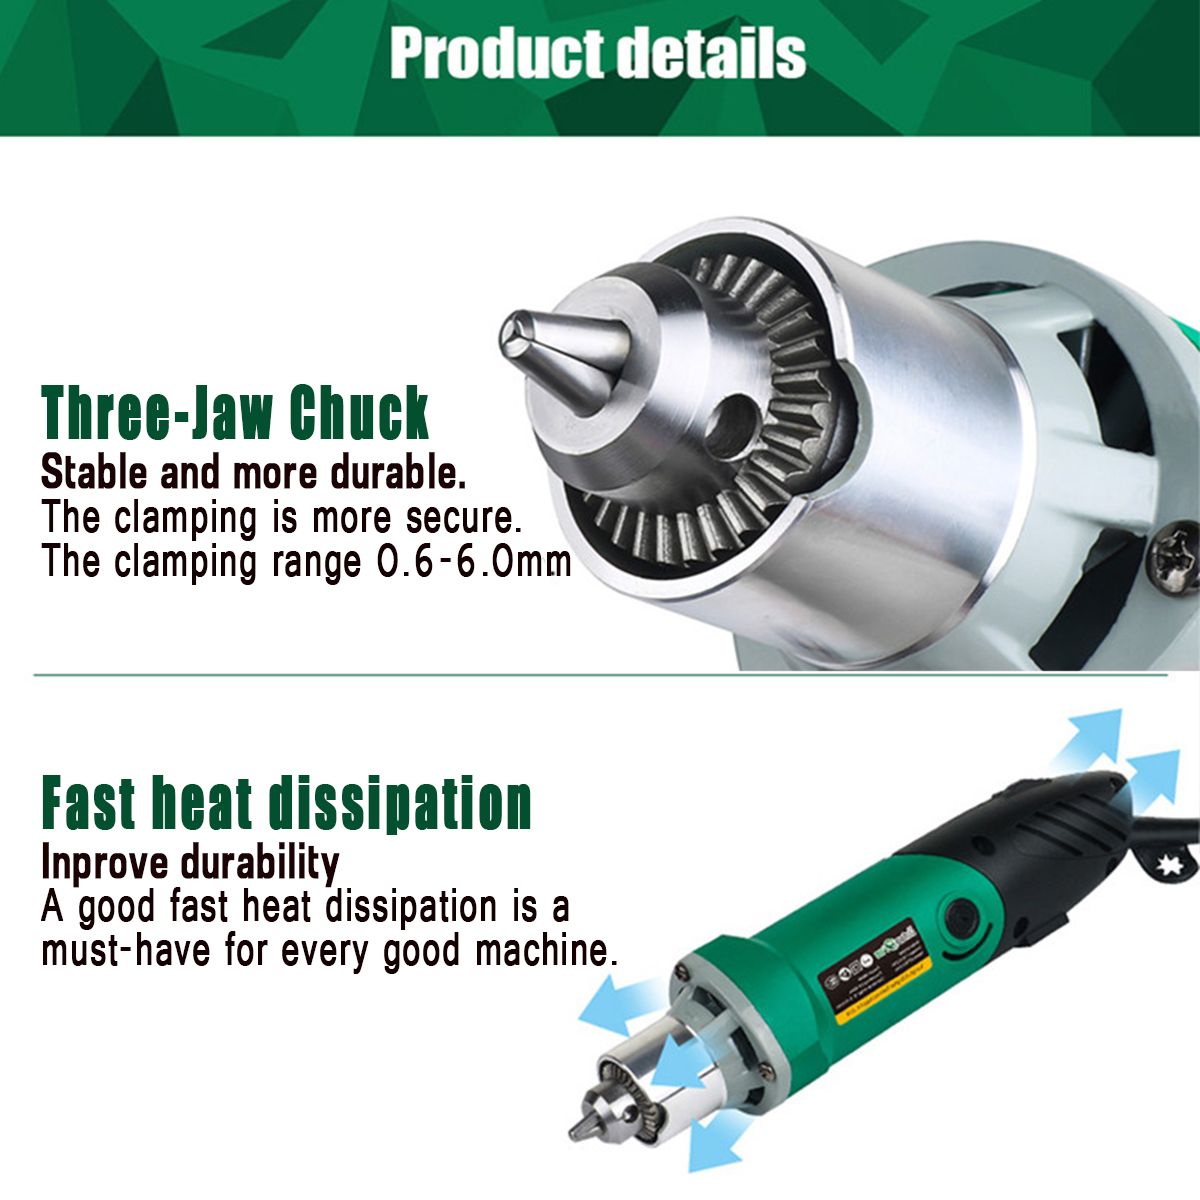 30000RPM-480W-Electric-Grinder-Drill-Engraver-Tool-Variable-Speed-Rotary-Carving-Polishing-Machine-1-1457301